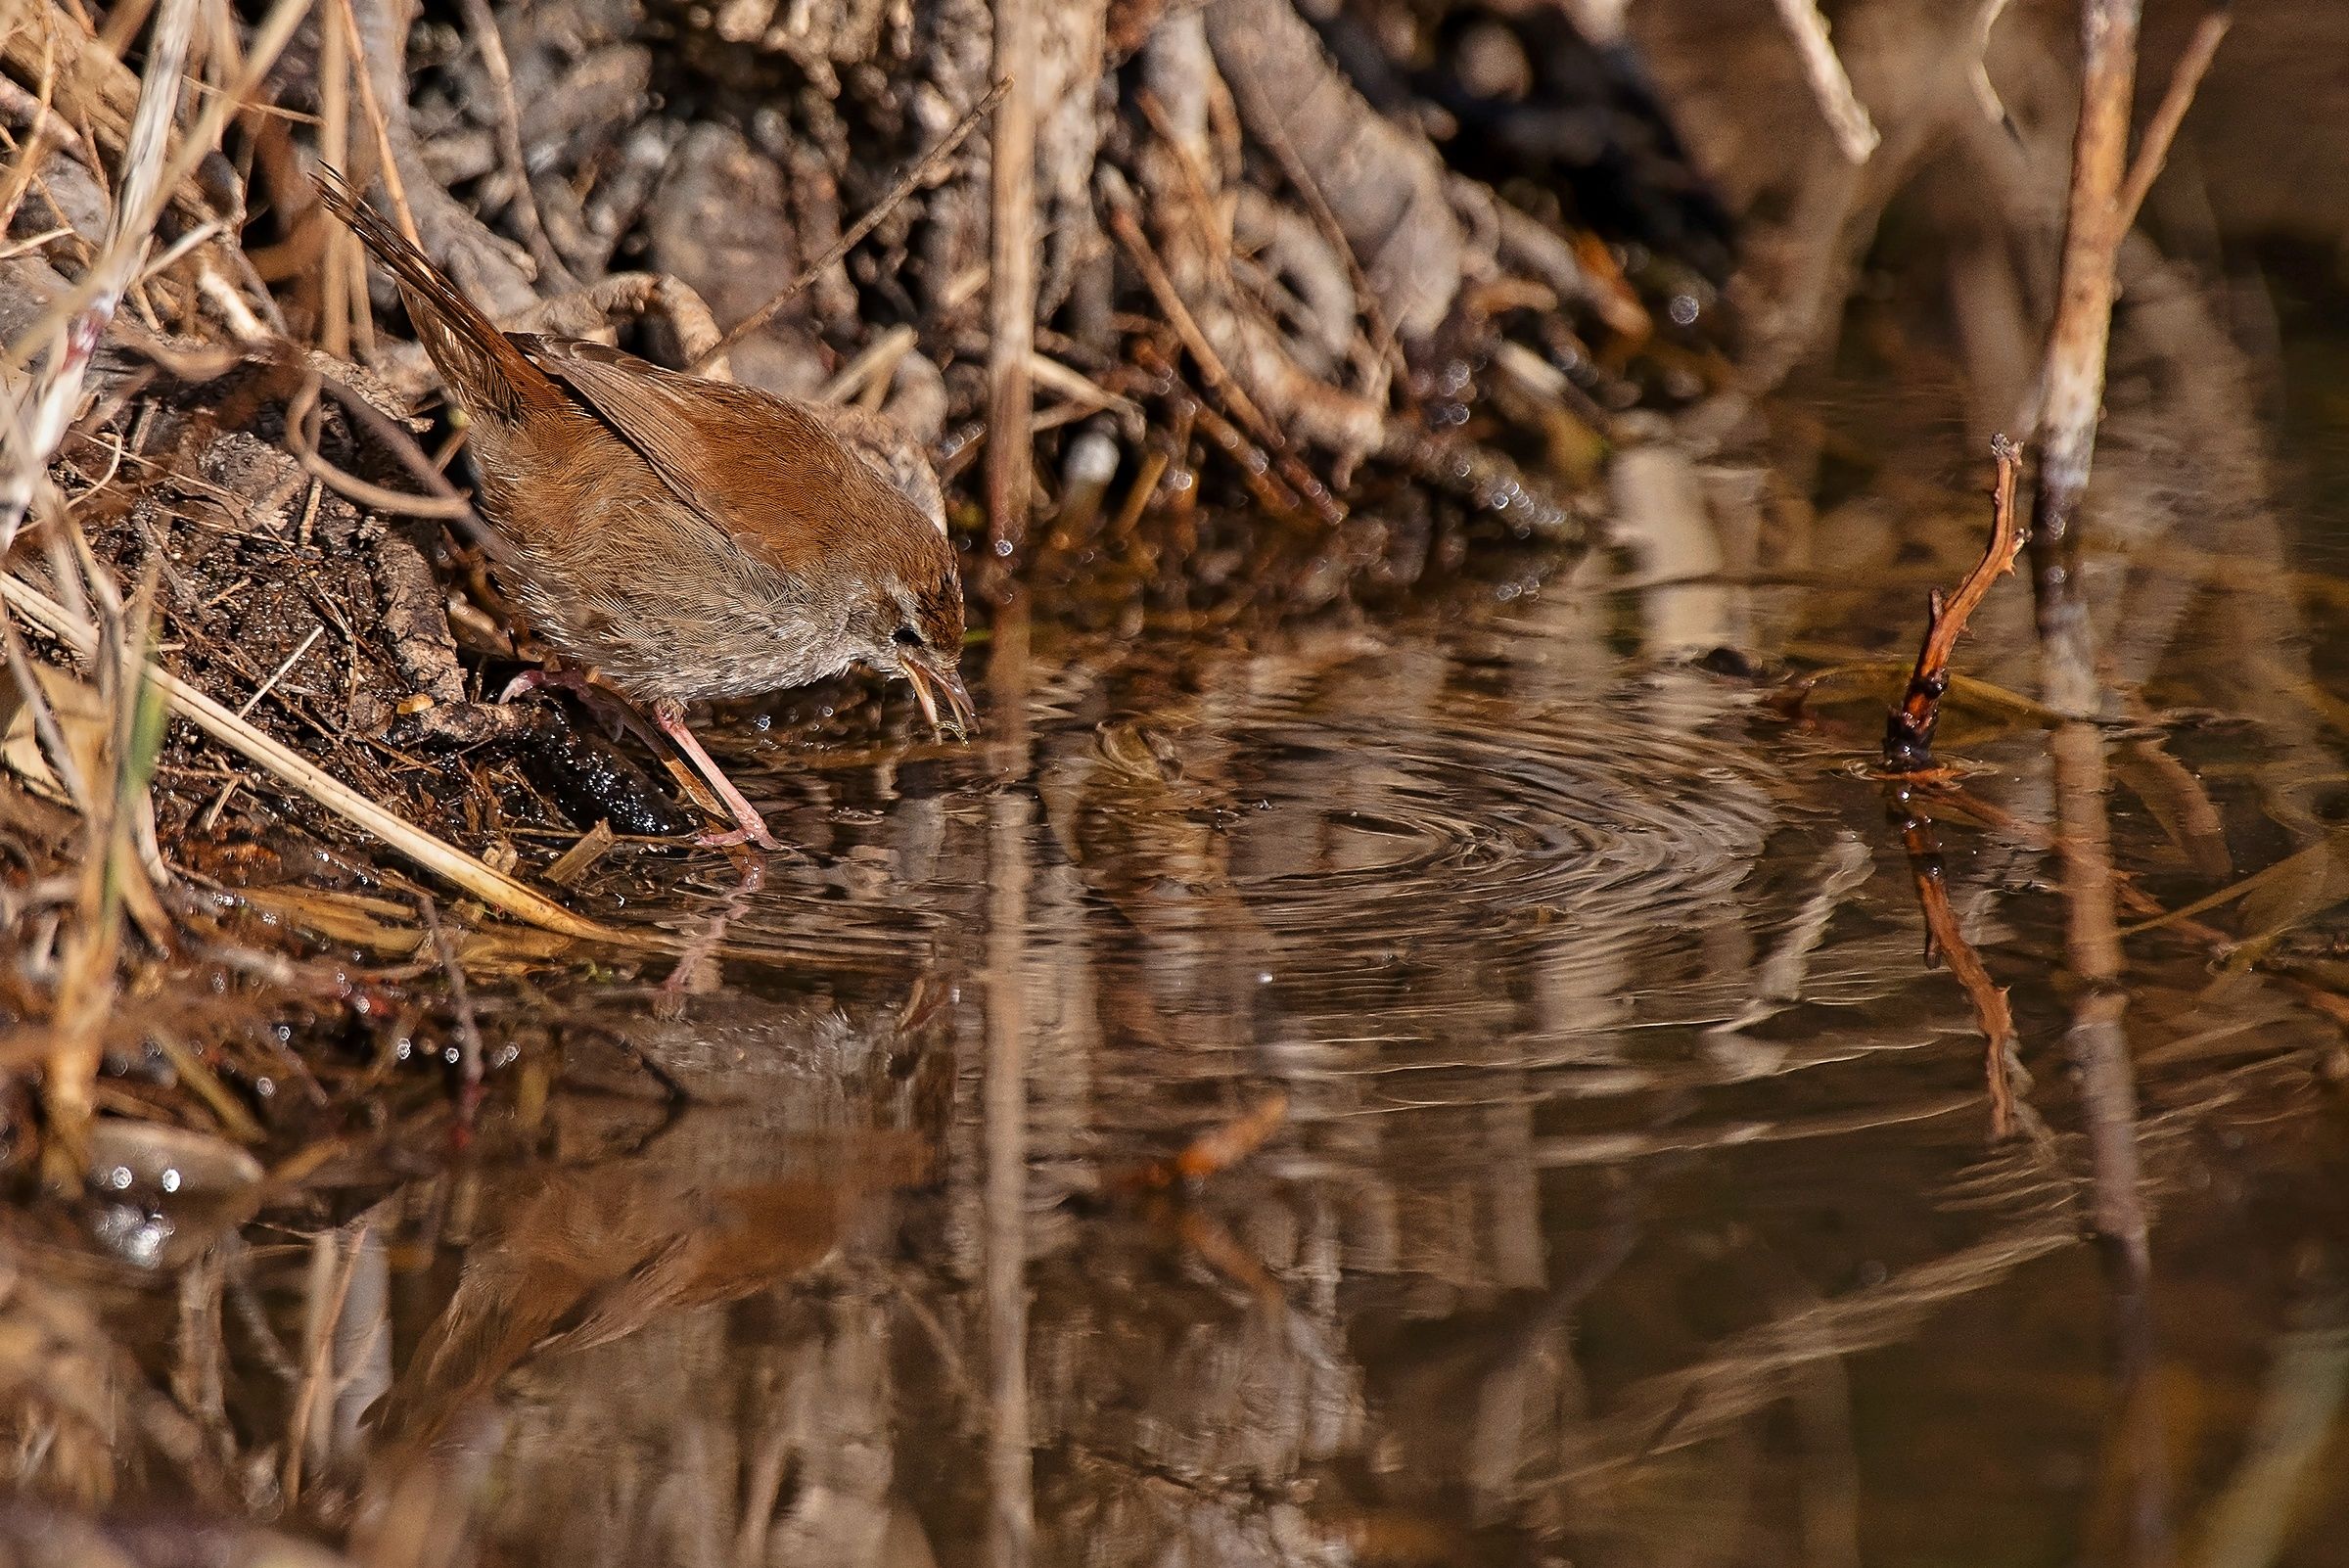 River nightingale with prey...